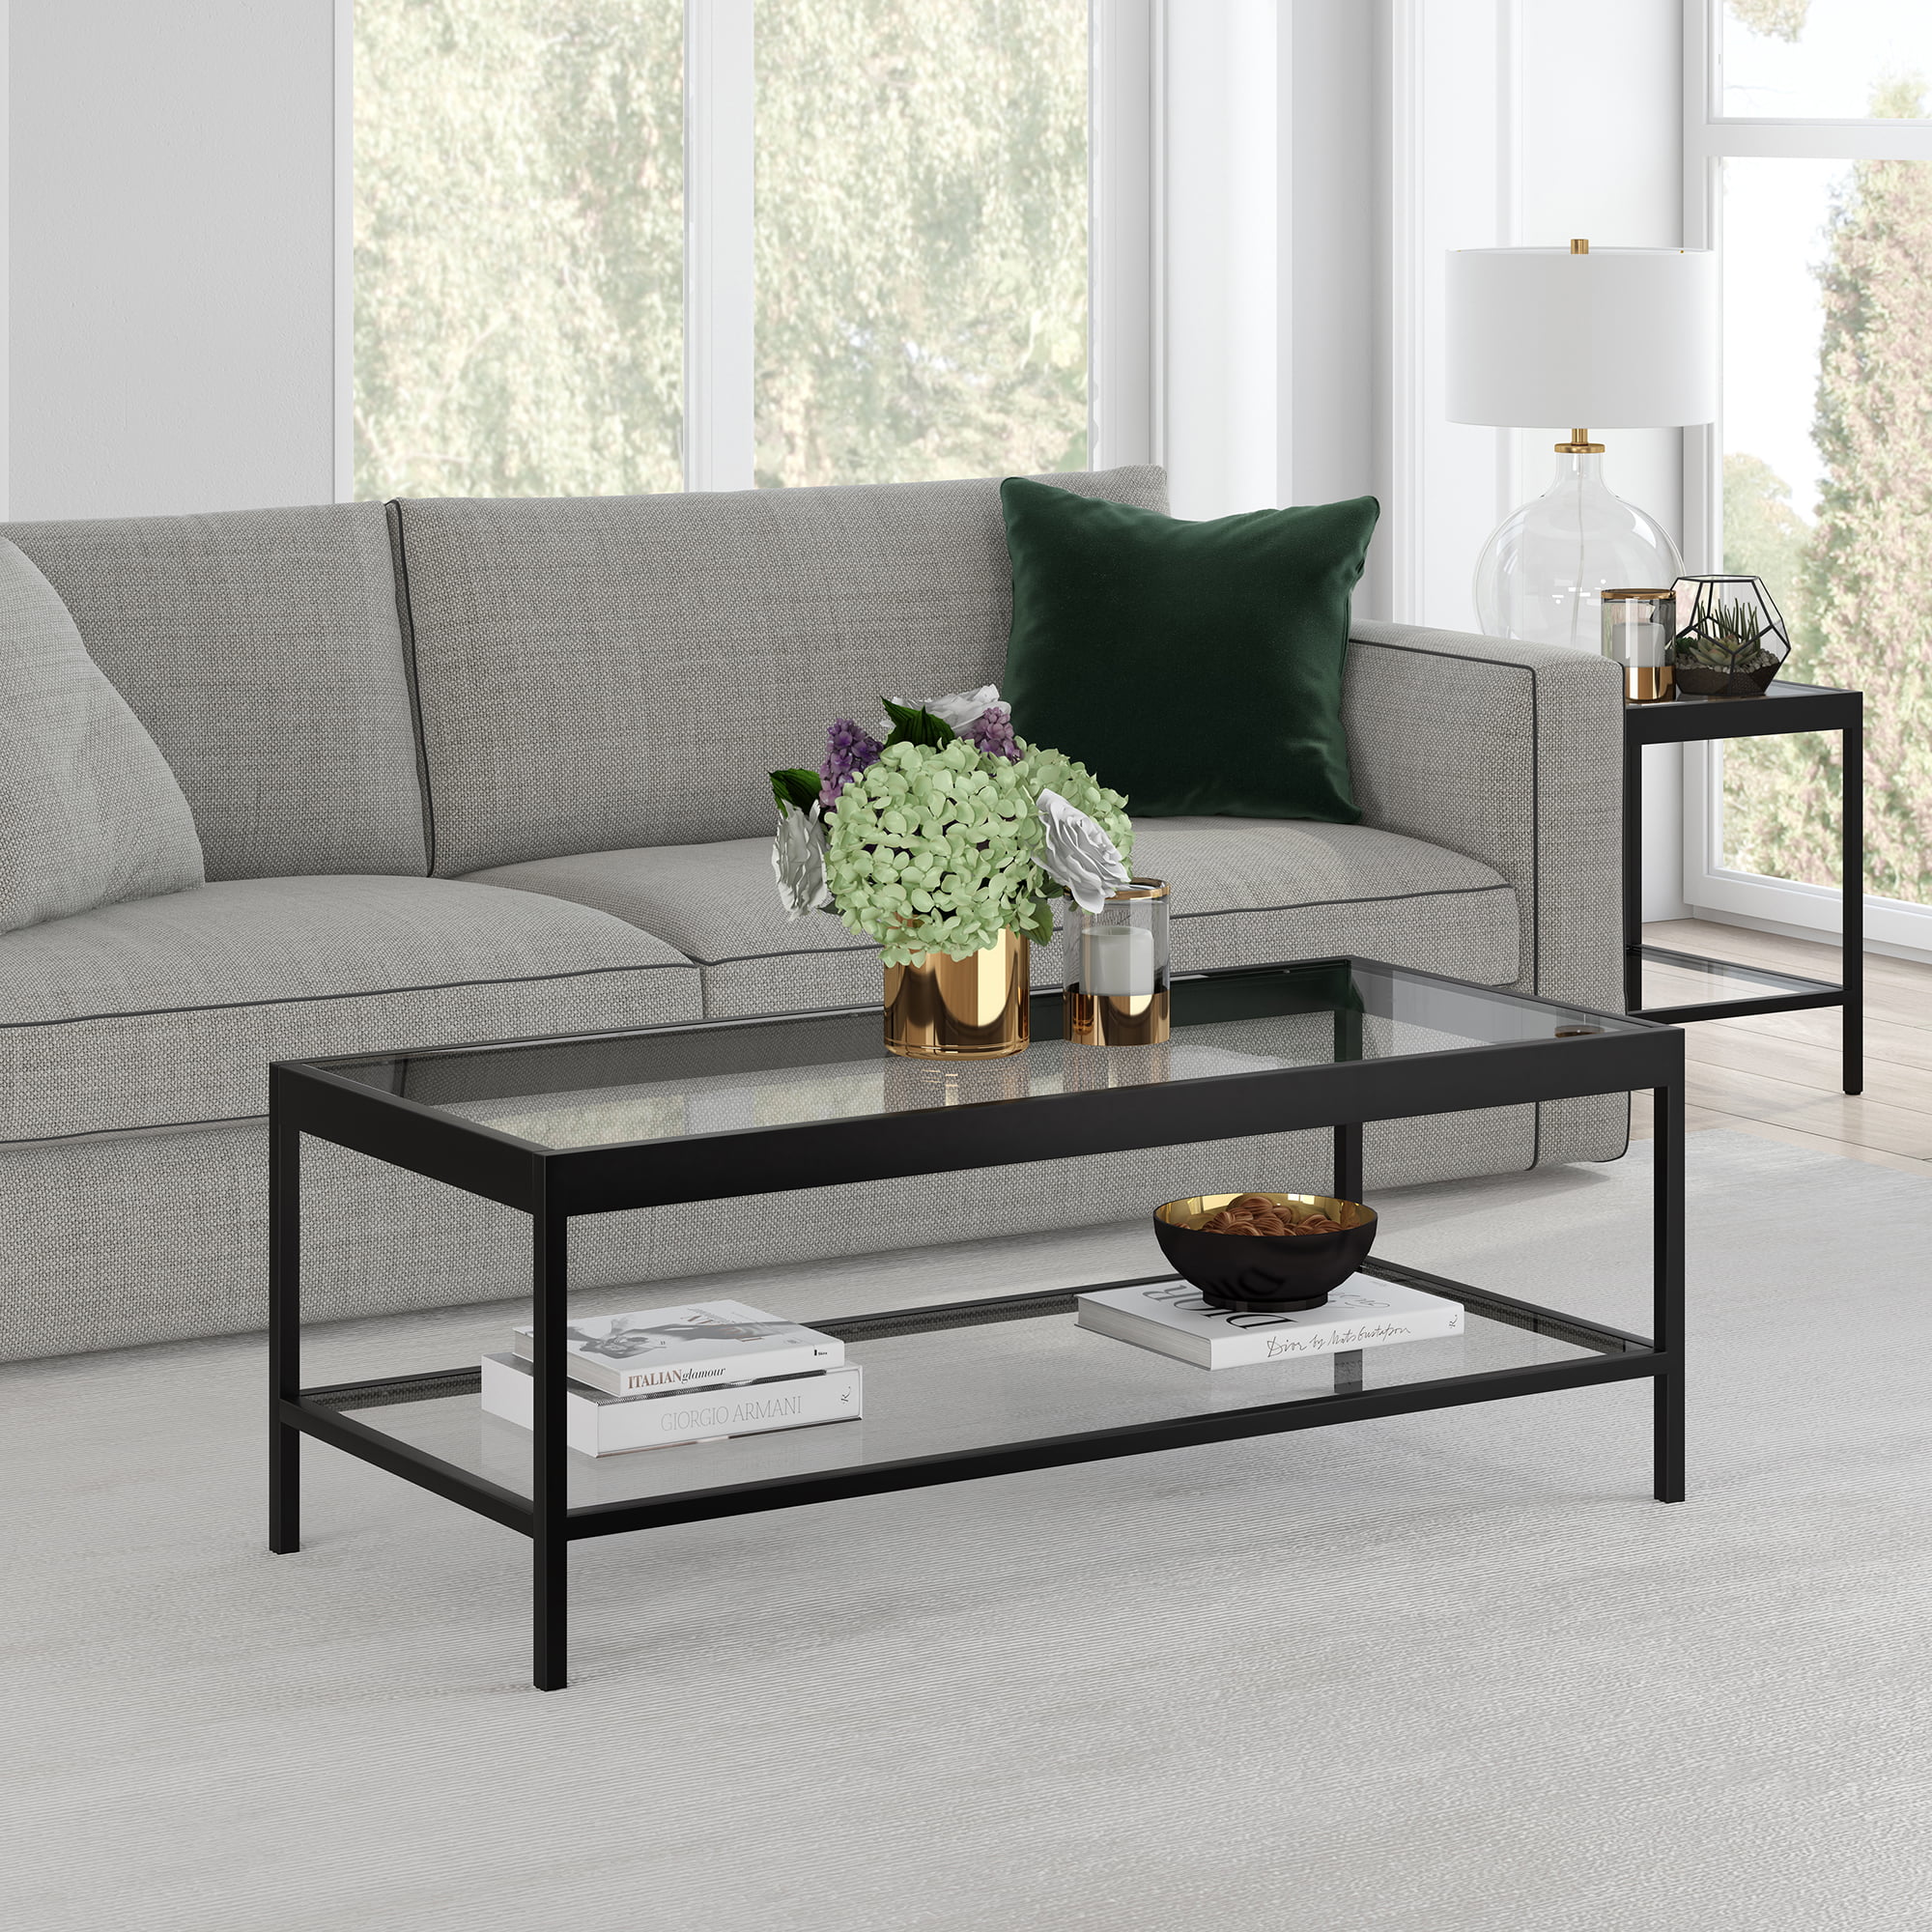 Modern Coffee Table with Open Shelf, Rectangular Table for Living Room ...